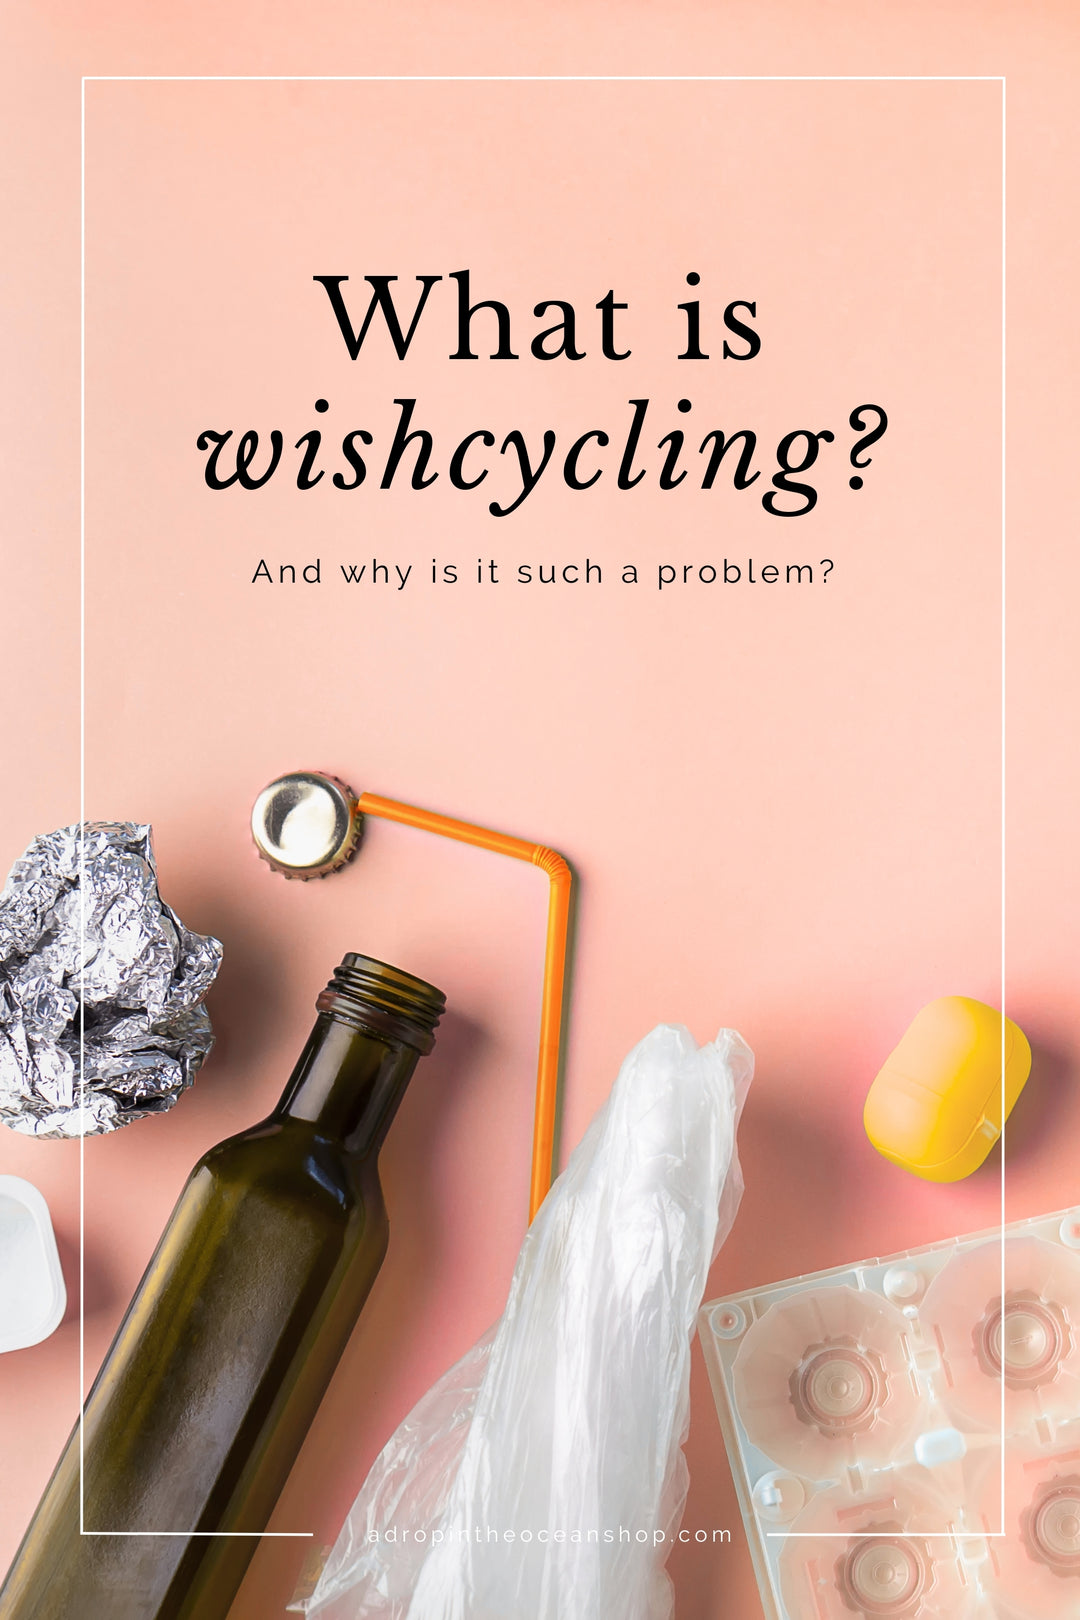 A Drop in the Ocean Zero Waste Store: What is wishcycling and why is it a problem?